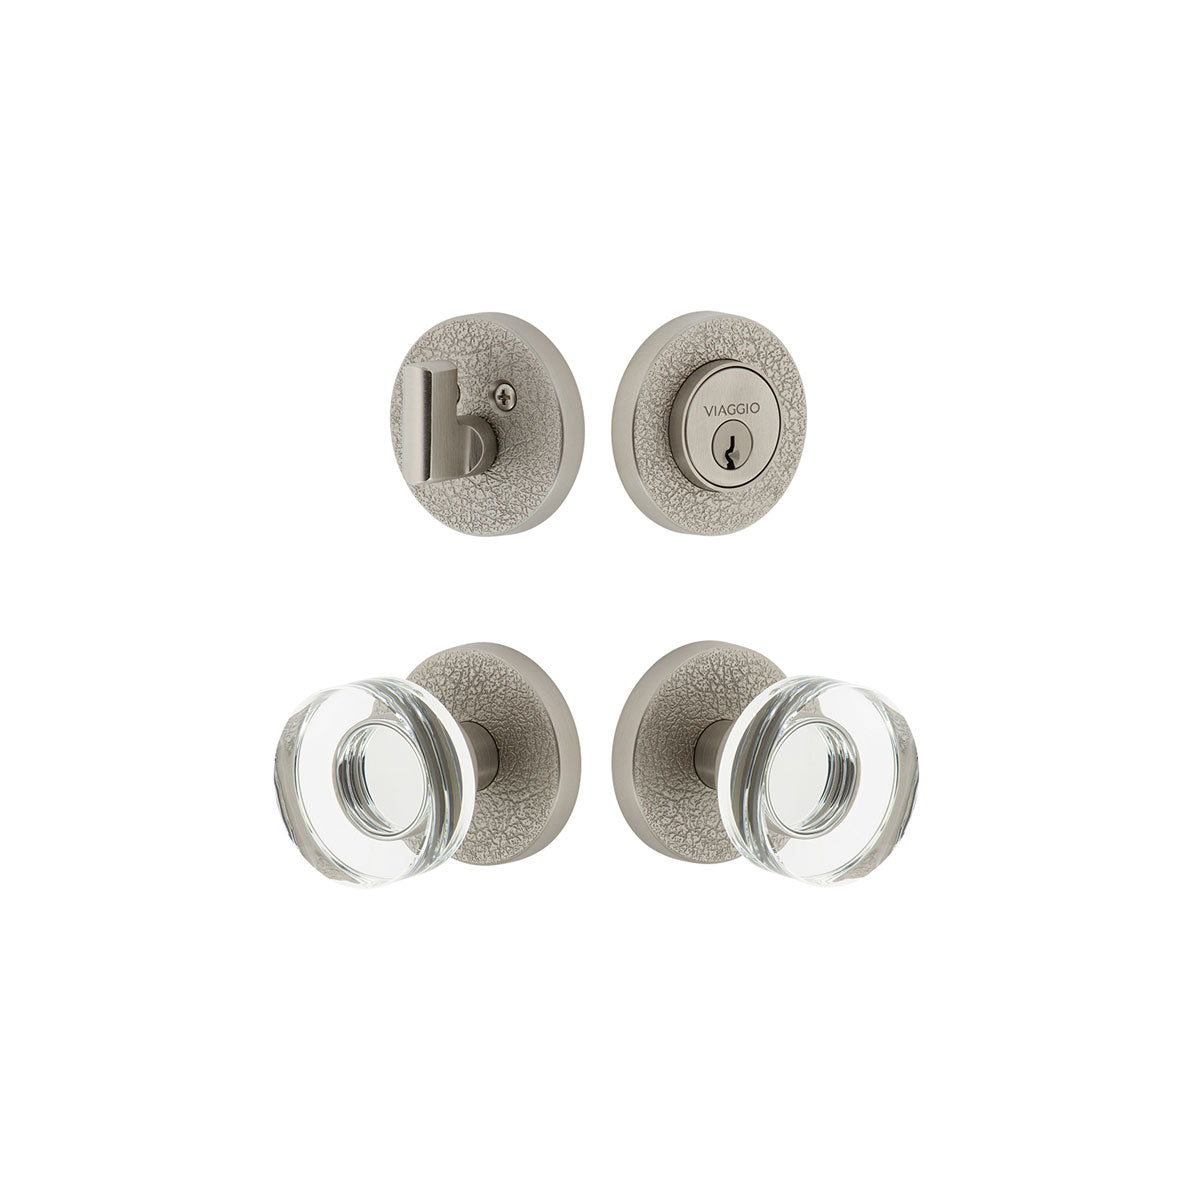 Circolo Leather Rosette Entry Set with Circolo Crystal Knob in Satin Nickel